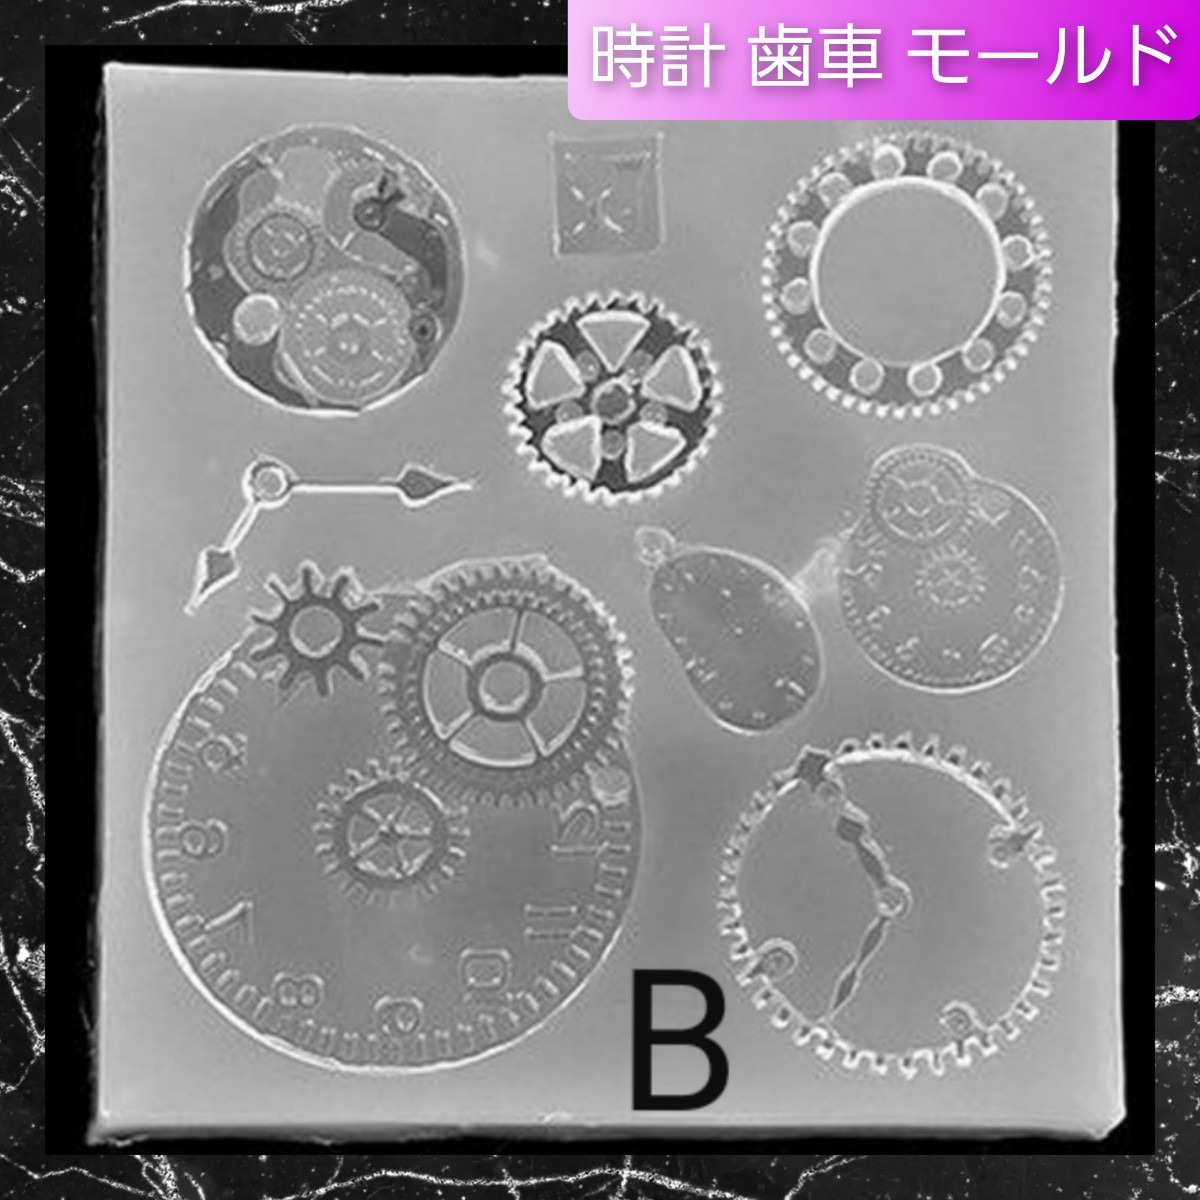 Silicone Mold Gear Clock Hand Steampunk B Type 02, Hobby, Culture, Handcraft, Handicrafts, others